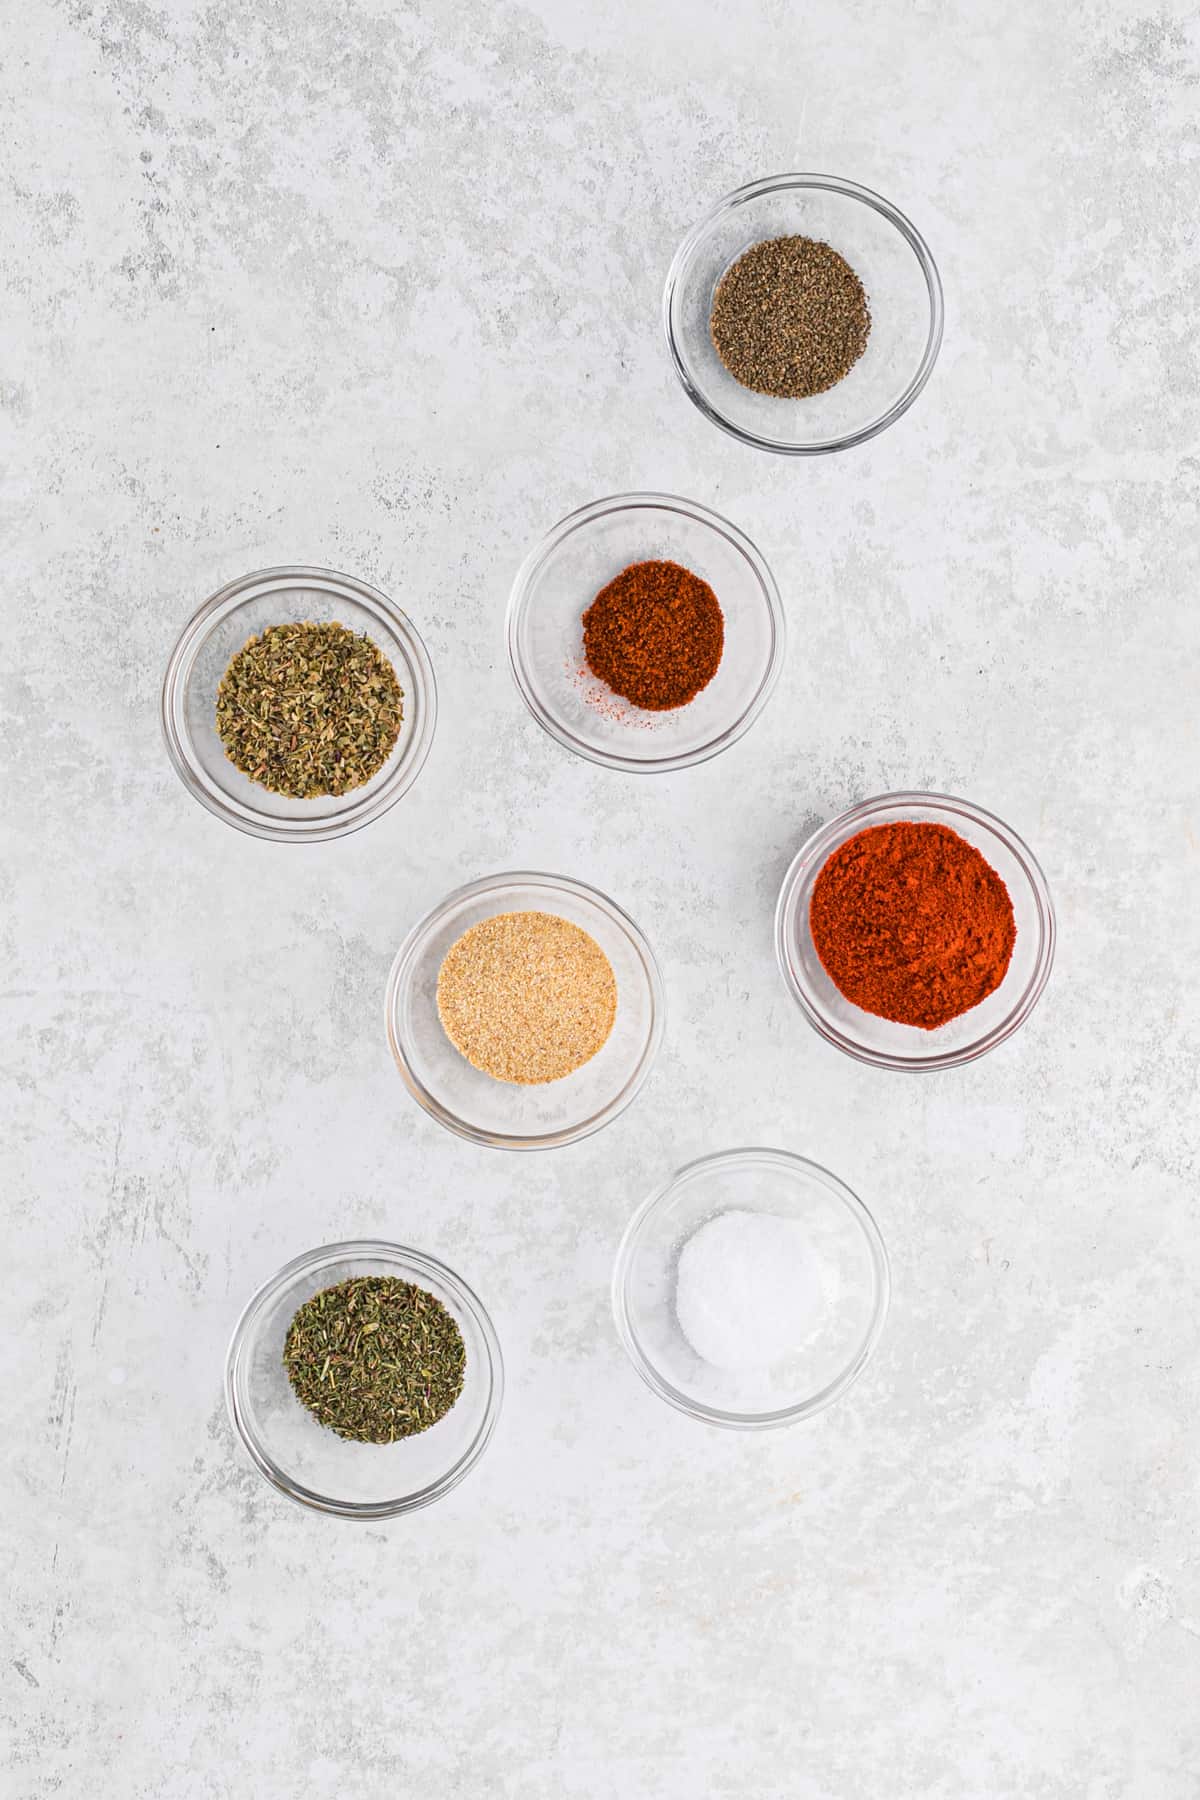 Individual spices in small glass bowls on a white surface.